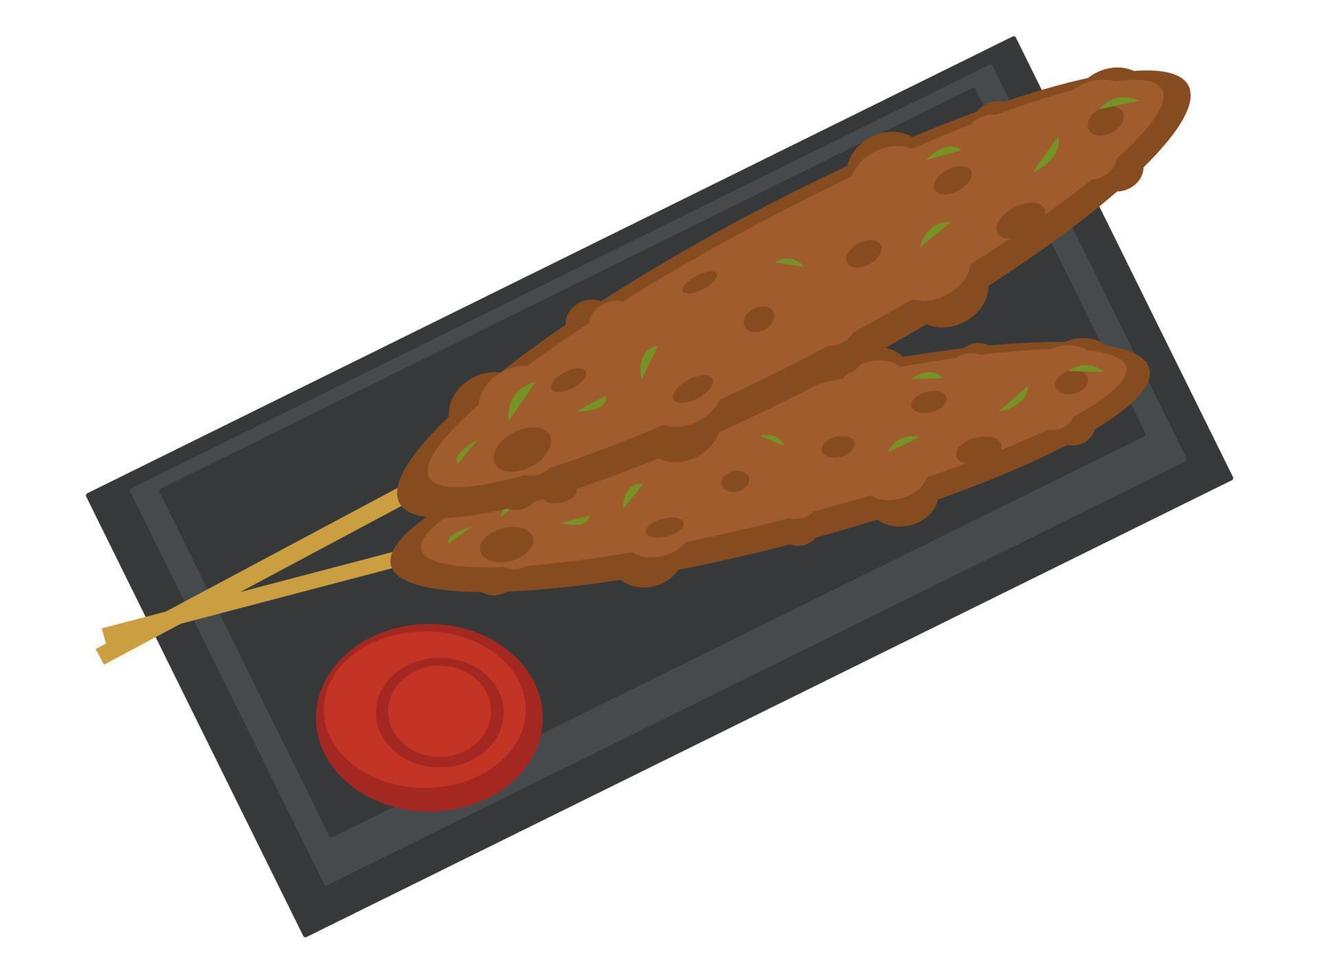 Japanese deep fried meat with ketchup sauce vector